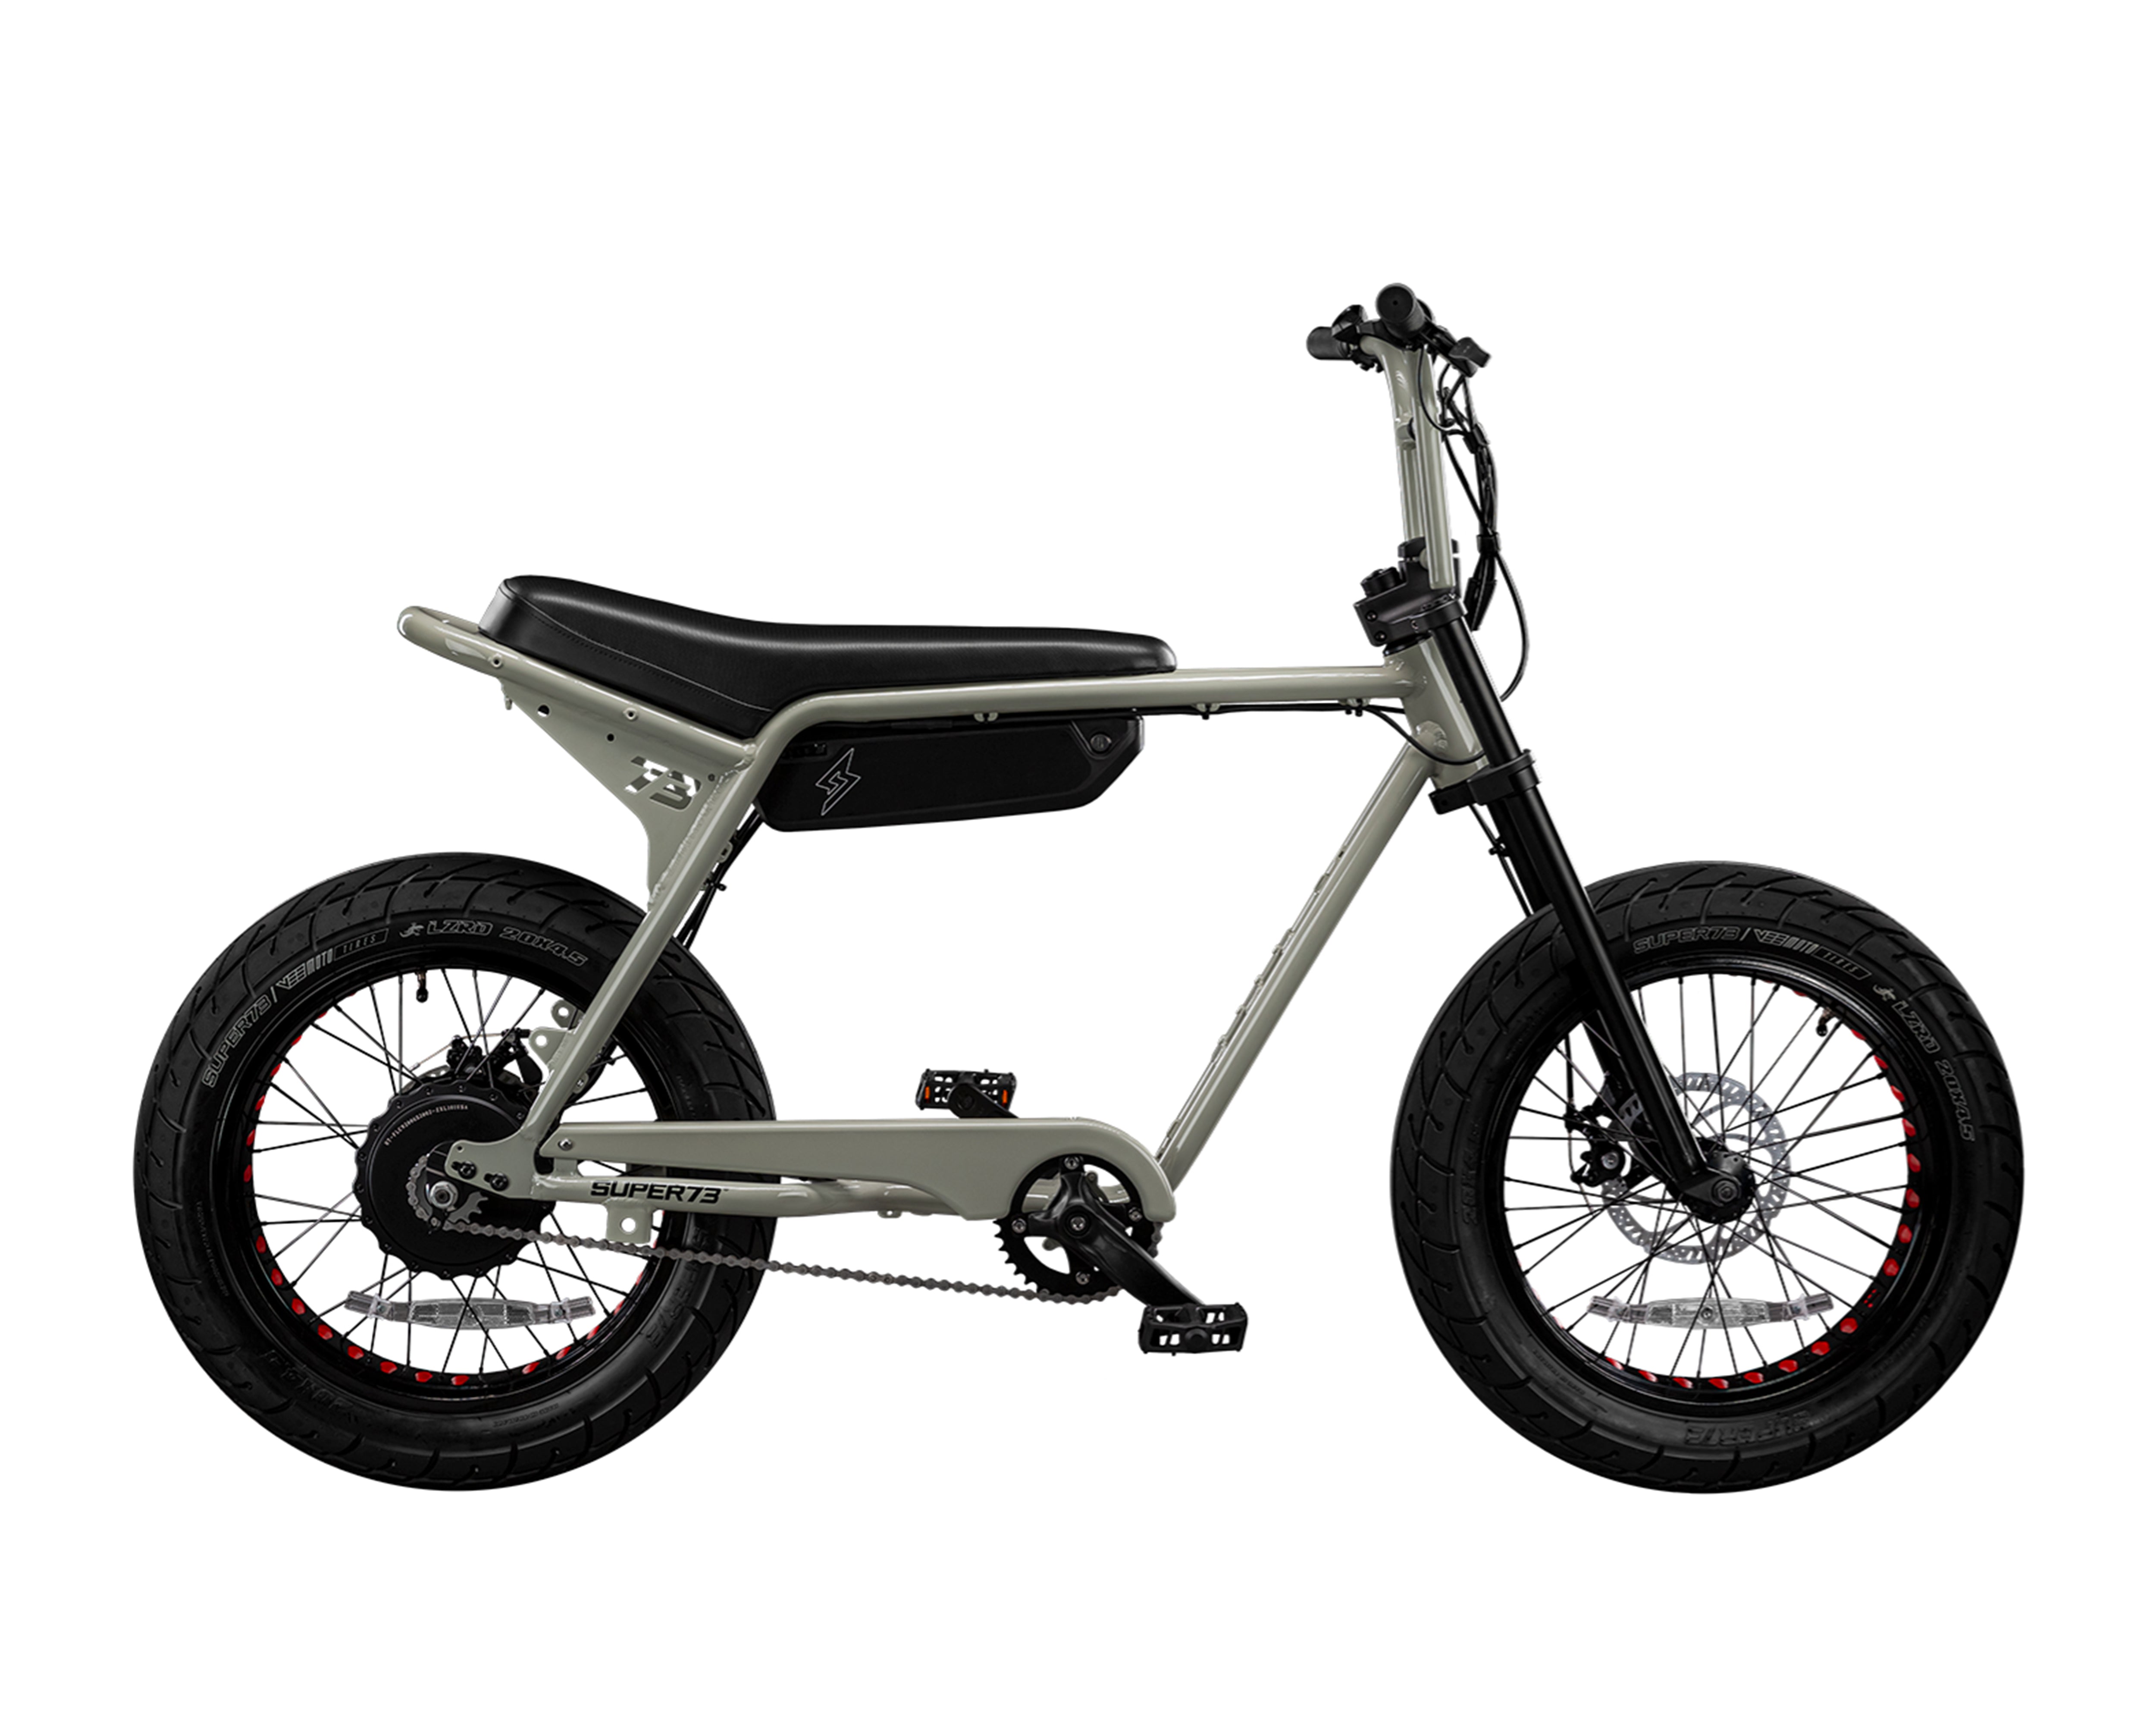 Super73-ZX – Incycle Bicycles